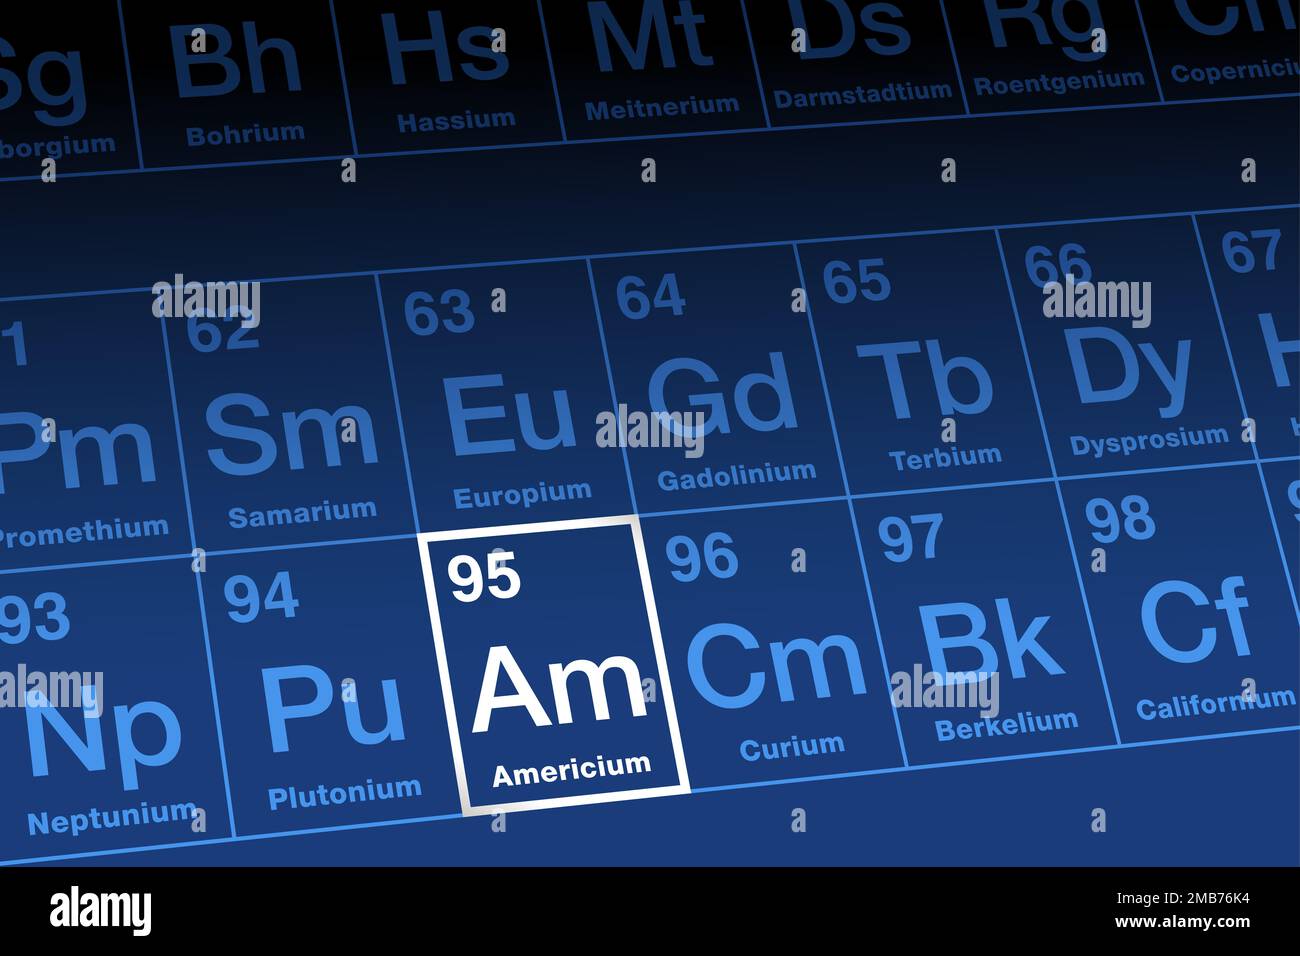 Americium on periodic table. Radioactive metallic element in the actinide series. With the atomic number 95 and symbol Am, named after the Americas. Stock Photo